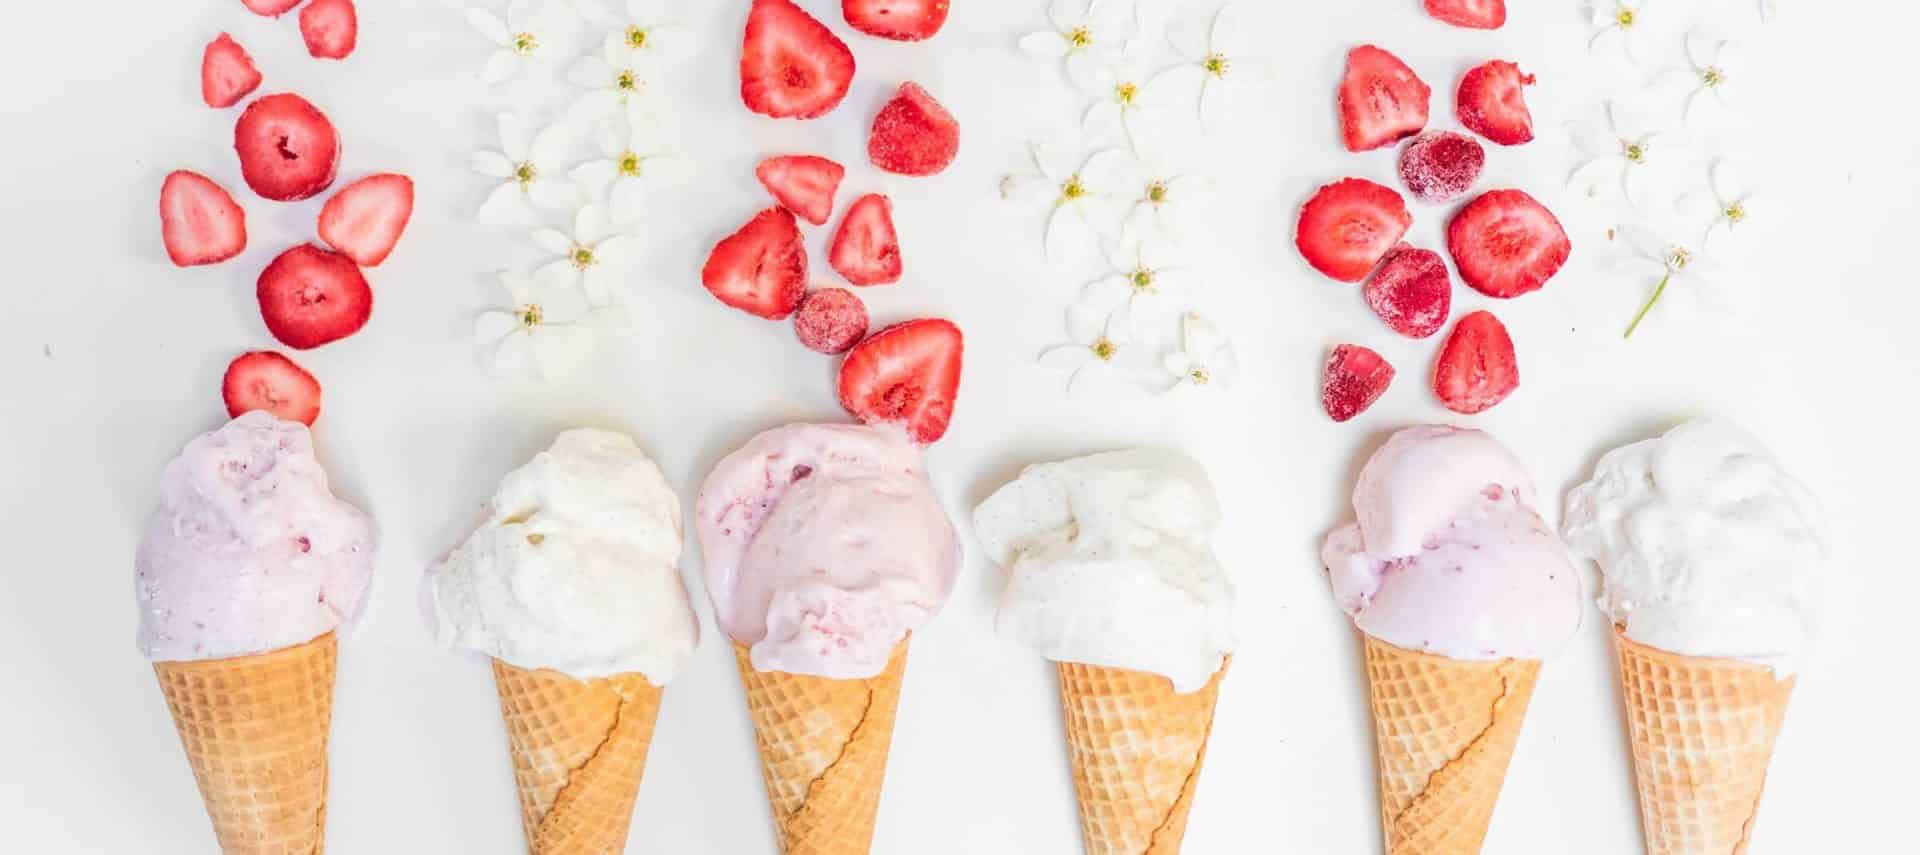 Ice cream cones with strawberries and flowers.